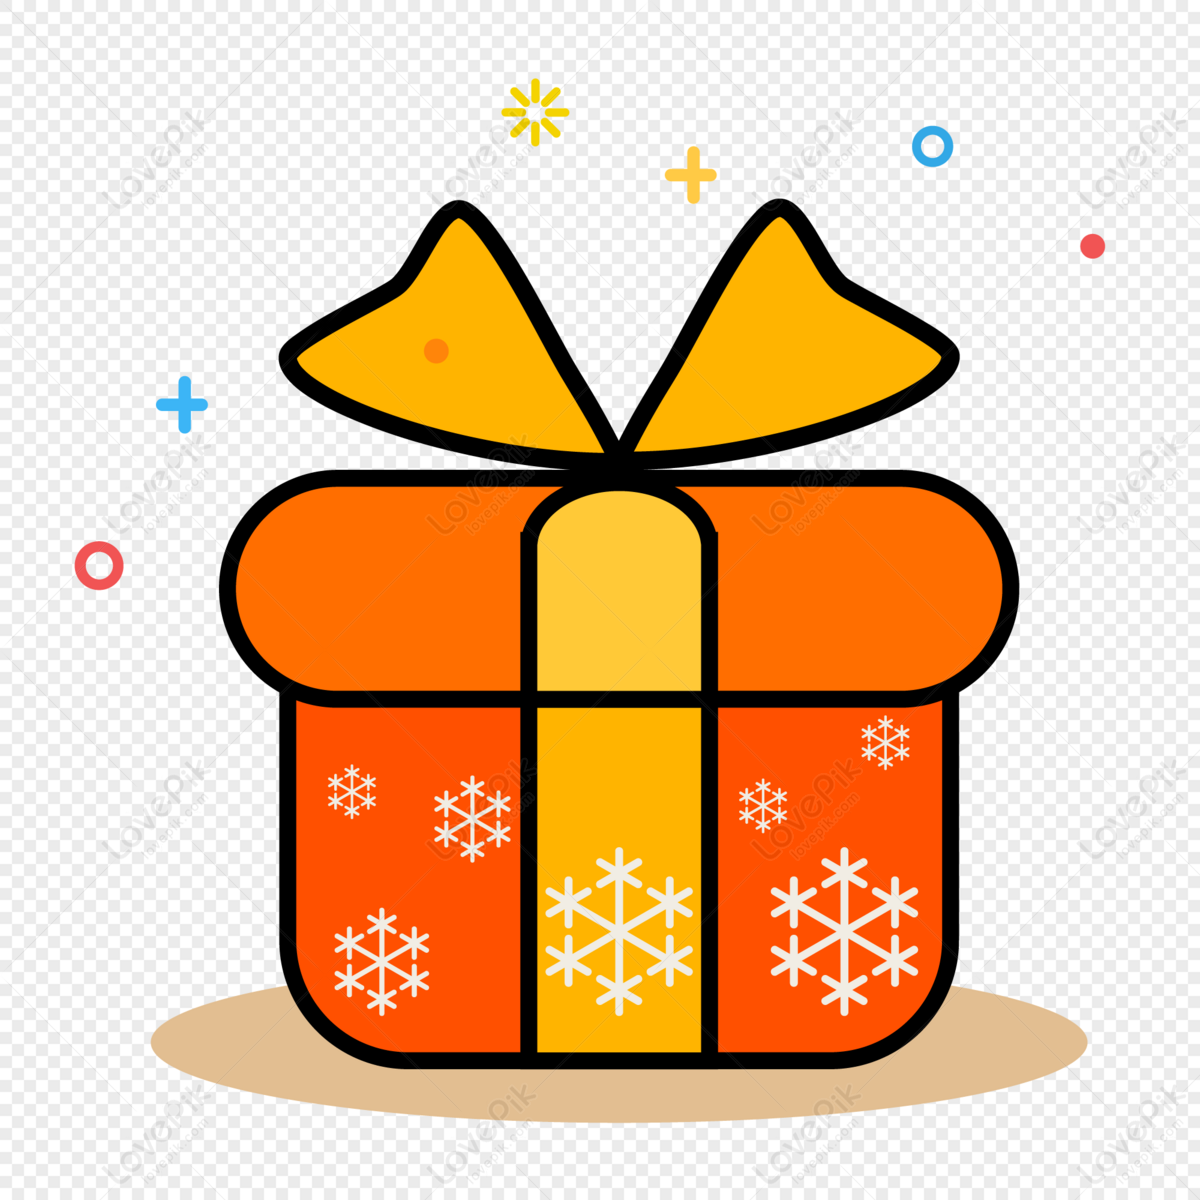 Gift Boxes High-Res Vector Graphic - Getty Images